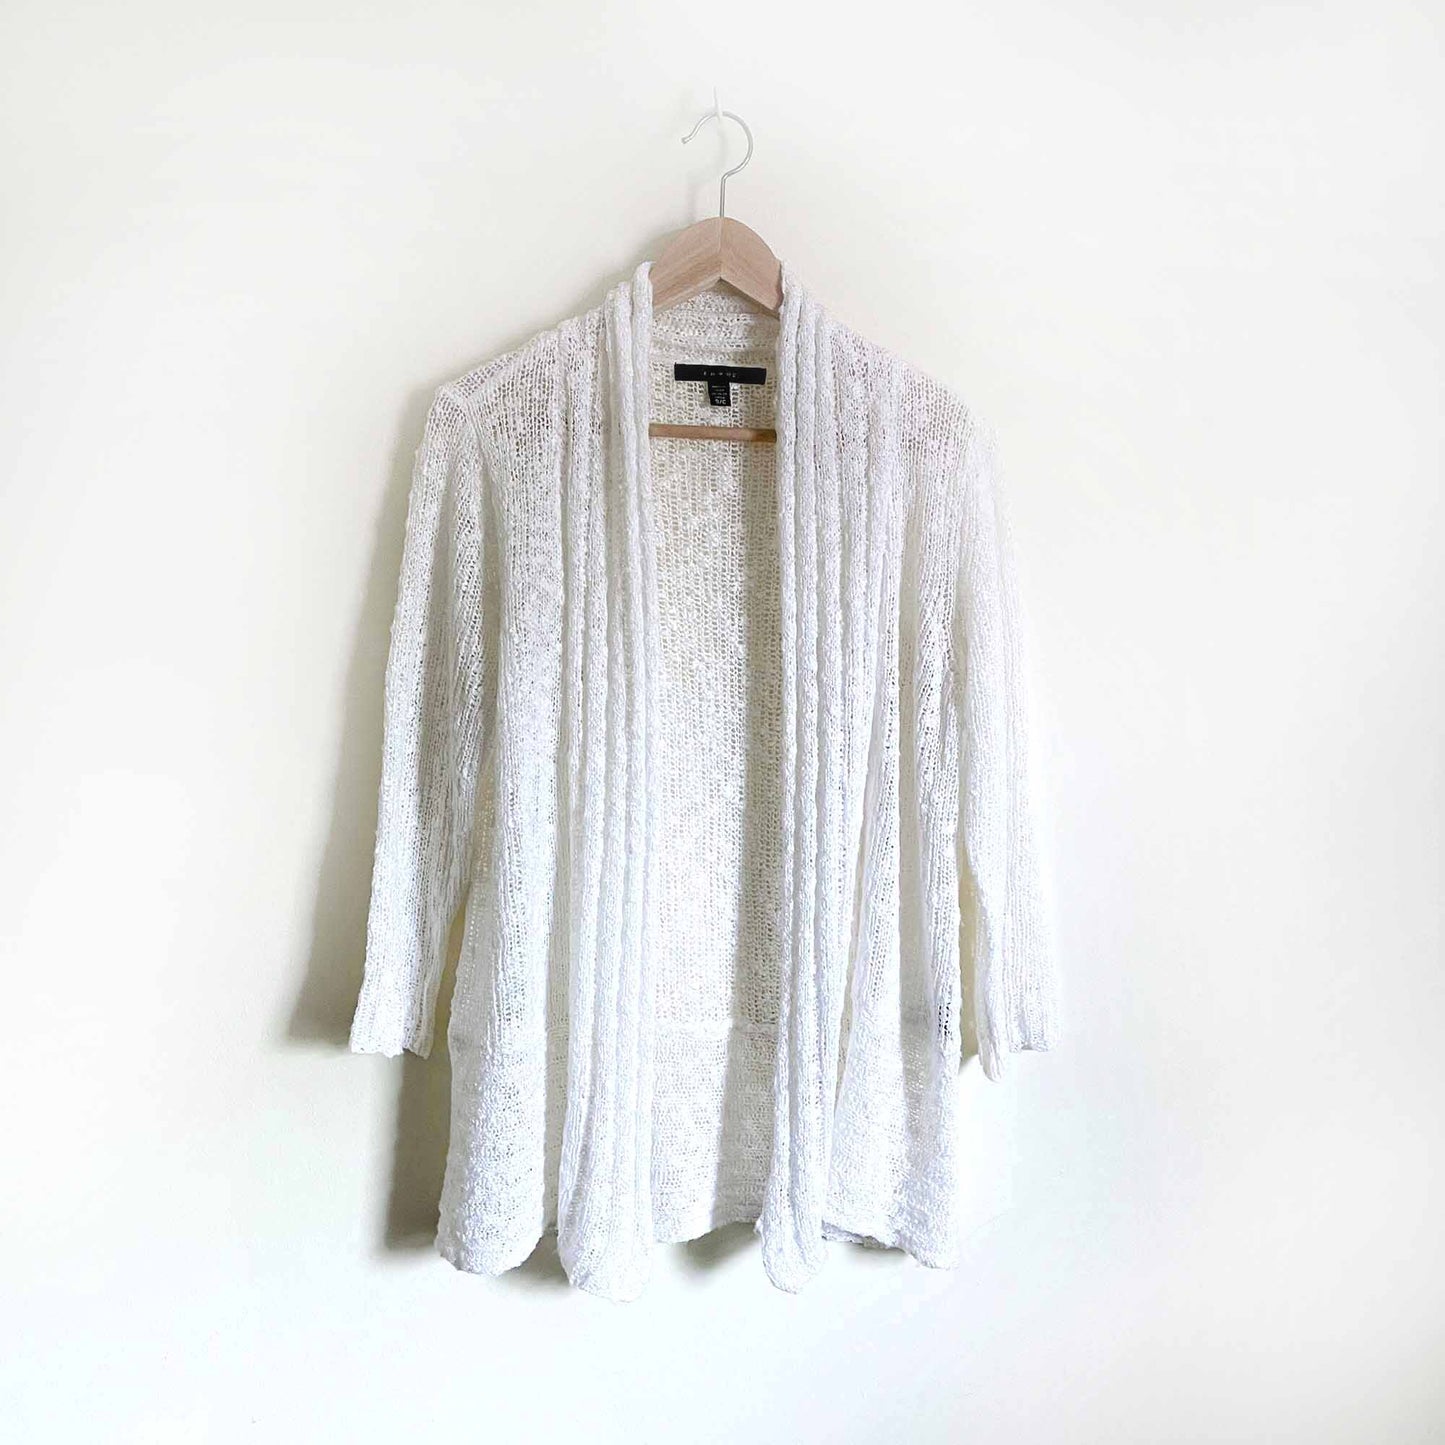 anthropologie fever loose-knit open cardigan - size small